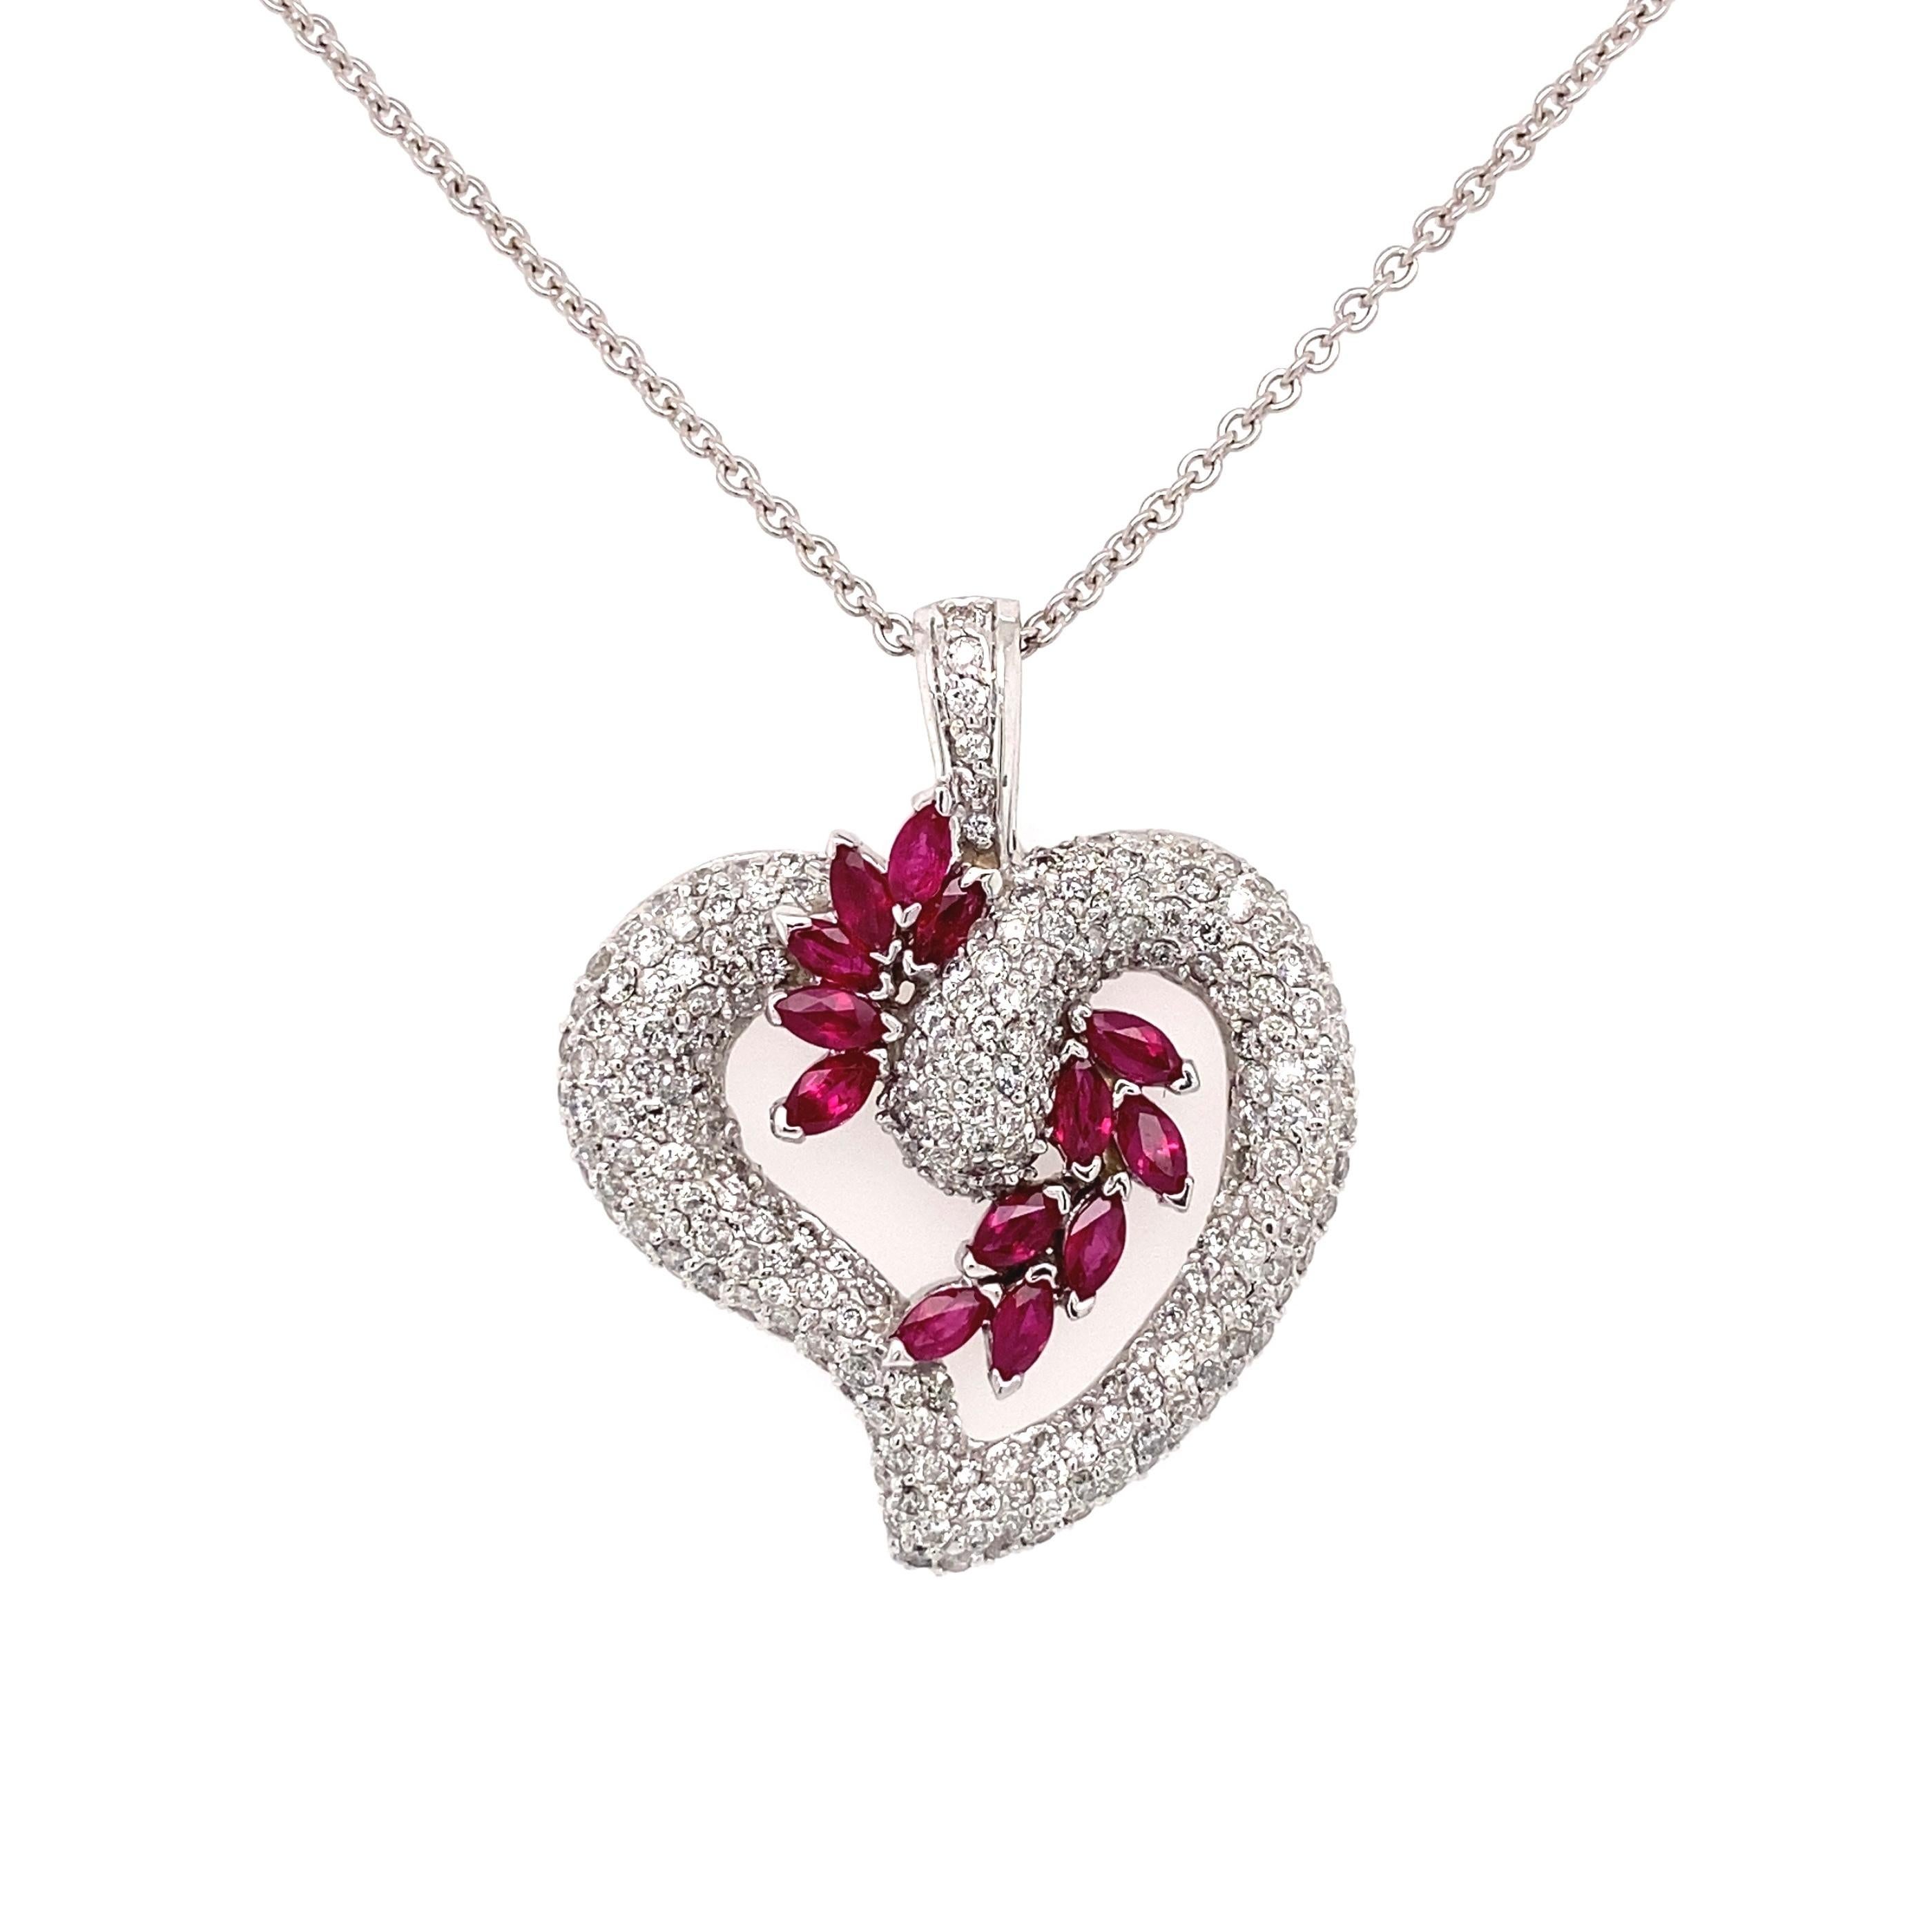 Simply Beautiful! Diamond Heart Pendant accented by Rubies, suspended from a 14K White Gold 18” chain. Hand set Diamonds, weighing approx. 2.18tcw and Rubies approx. 1.48tcw. Hand crafted 14K White Gold mounting. Pendant measures approx. 1.35” L x